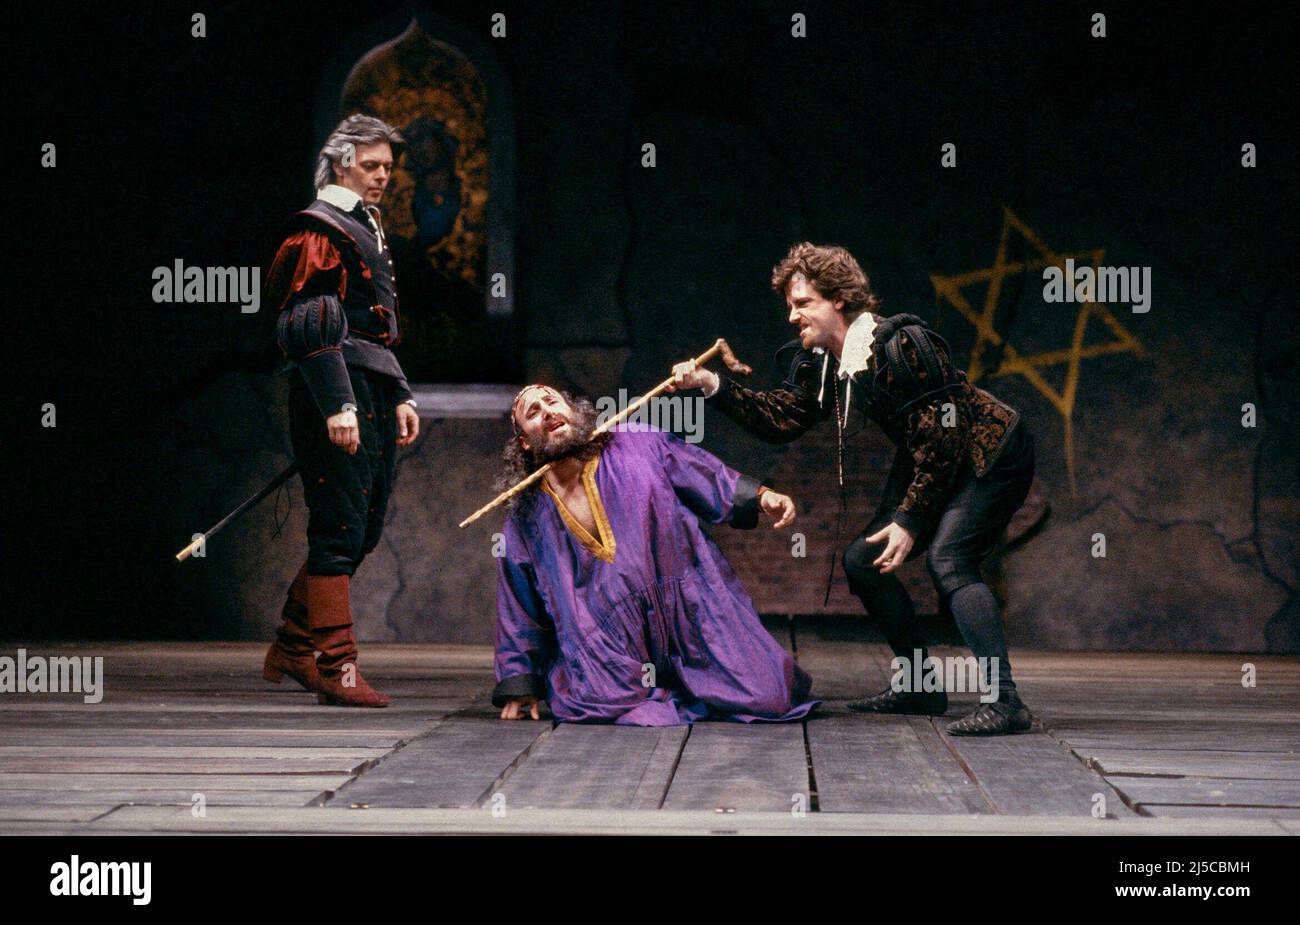 l-r: Michael Cadman (Salerio), Antony Sher (Shylock), Gregory Doran (Solanio) in THE MERCHANT OF VENICE by Shakespeare at the Royal Shakespeare Company (RSC), Royal Shakespeare Theatre, Stratford-upon-Avon, England  29/04/1987  music: Guy Woolfenden  set design: Kit Surrey  costumes: Andreane Neofitou  lighting: Robert Bryan  director: Bill Alexander Stock Photo